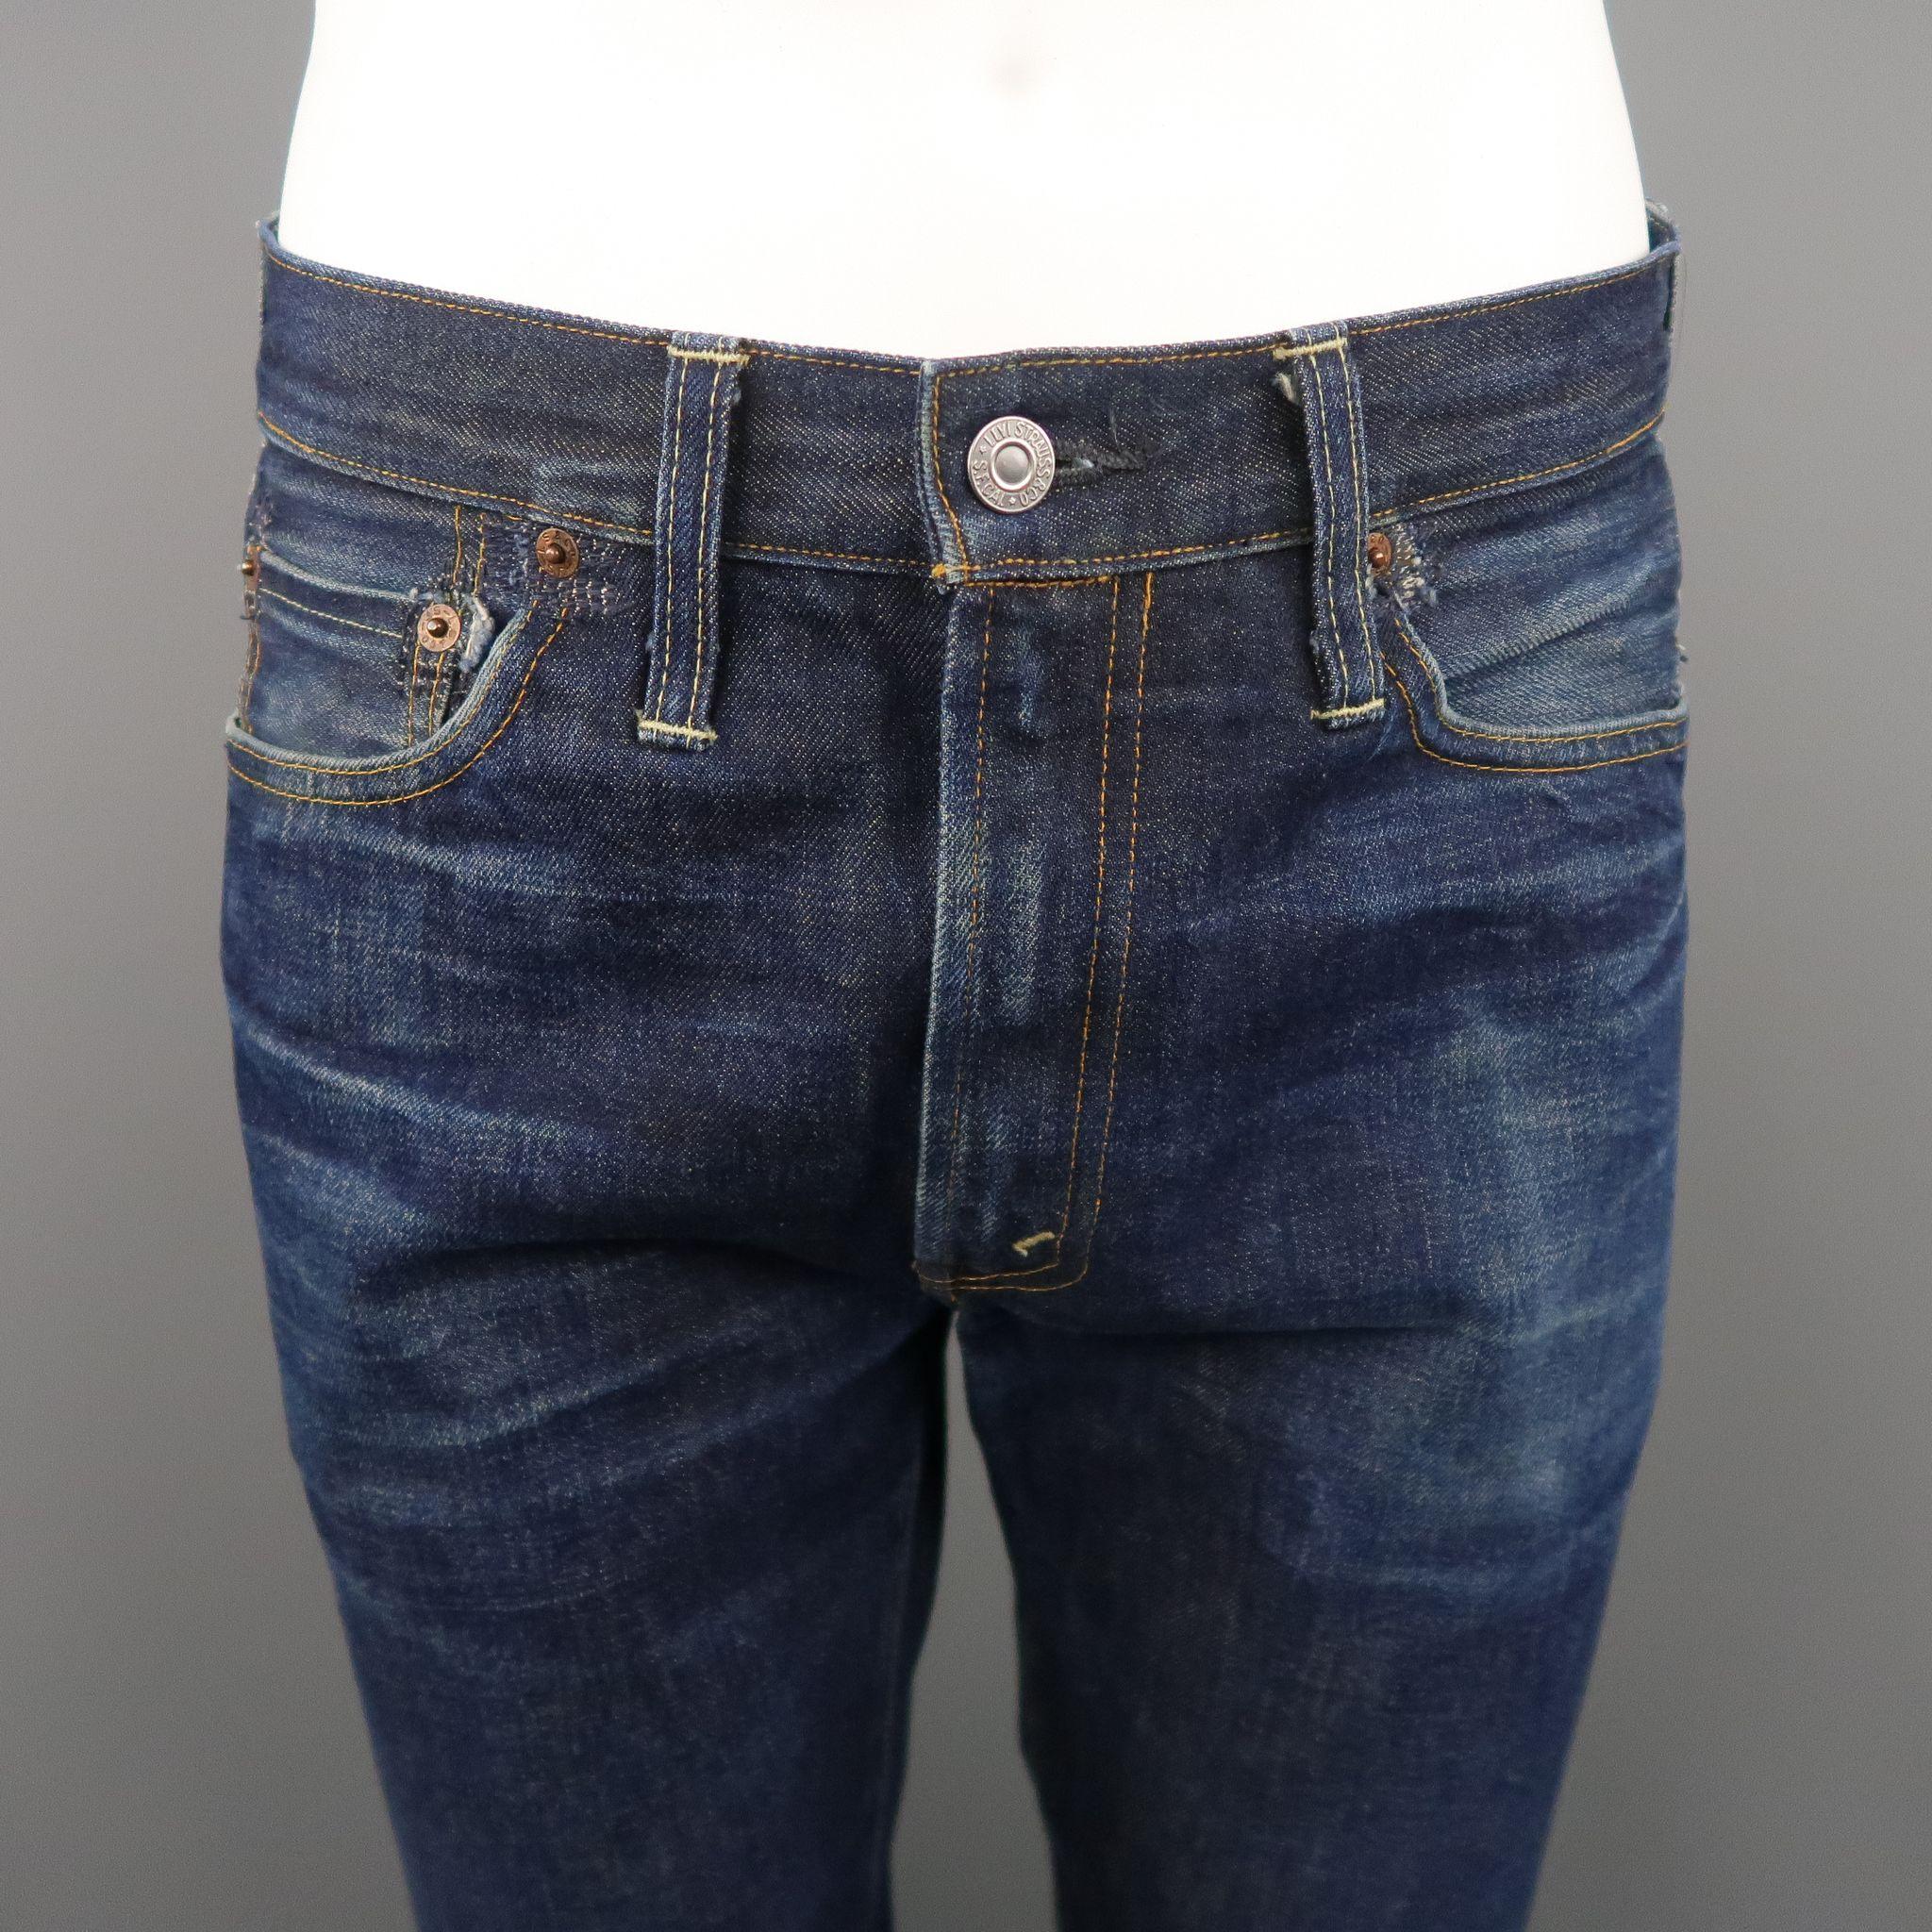 LEVI'S jeans comes in a indigo selvedge denim with a contrast stitch, distressed, with a contrast pale at back and zip fly. 501 Z XX Capital 